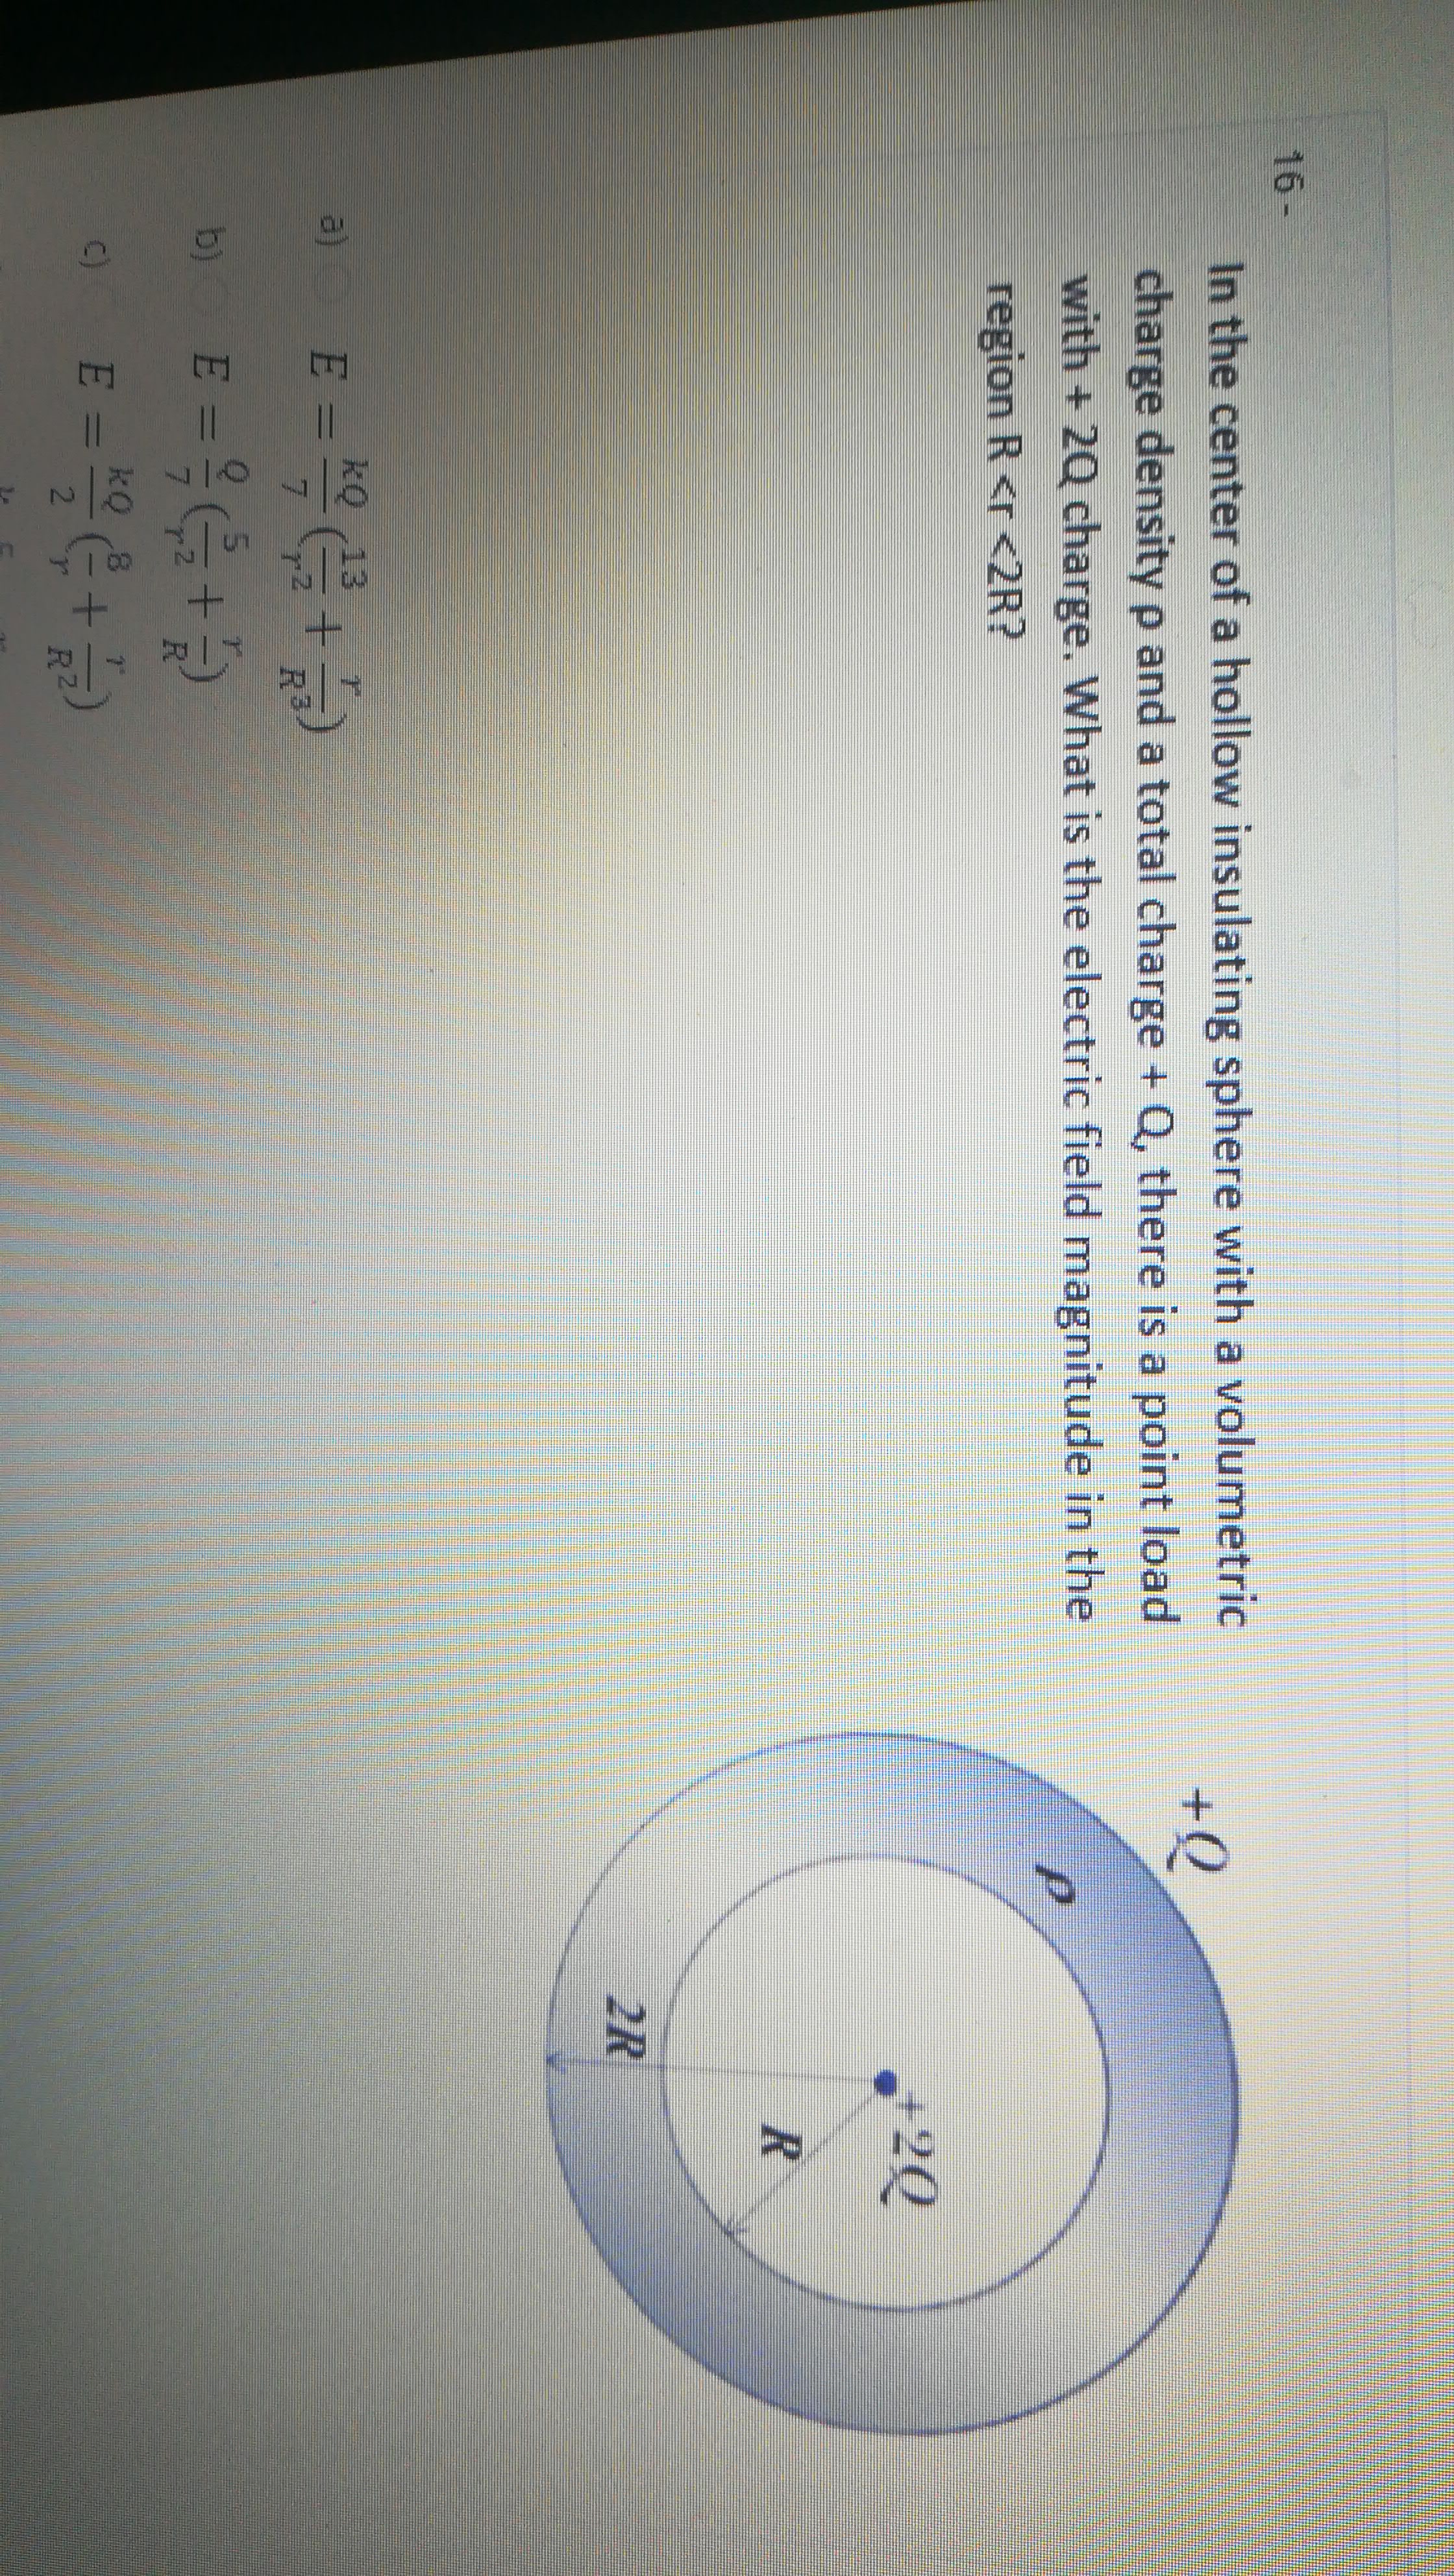 In the center of a hollow insulating sphere with a volumetric
charge densityp and a total charge + Q, there is a point load
with + 2Q charge. What is the electric field magnitude in the
region R <r <2R?
